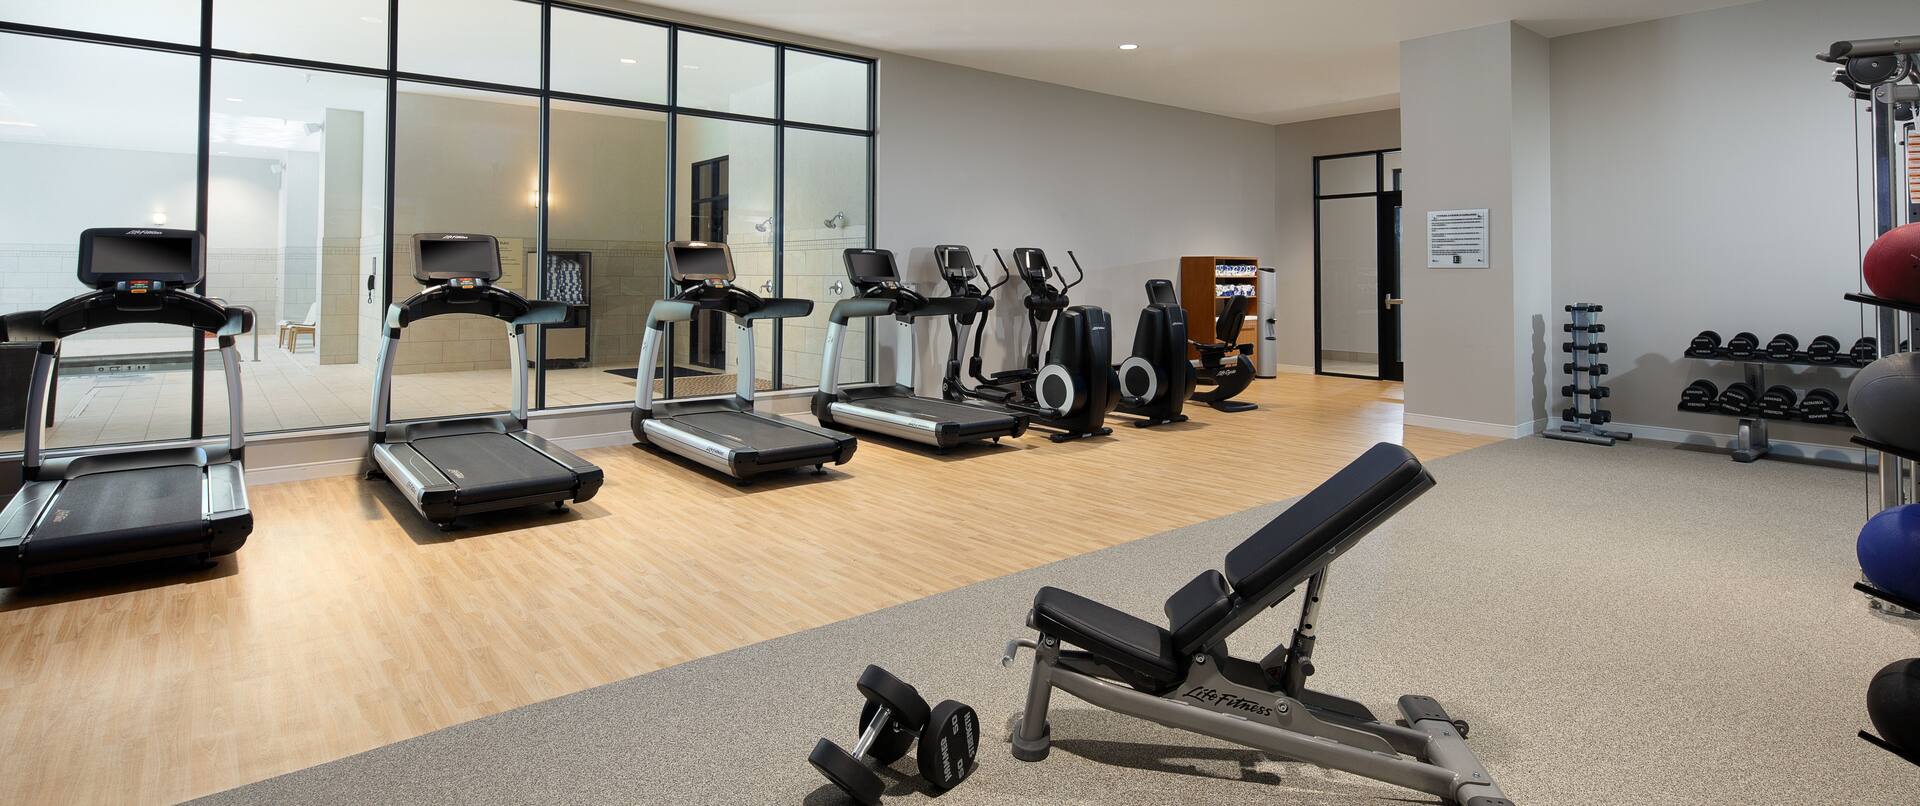 Fitness Center with Treadmills, Cross-Trainer and Weight Bench